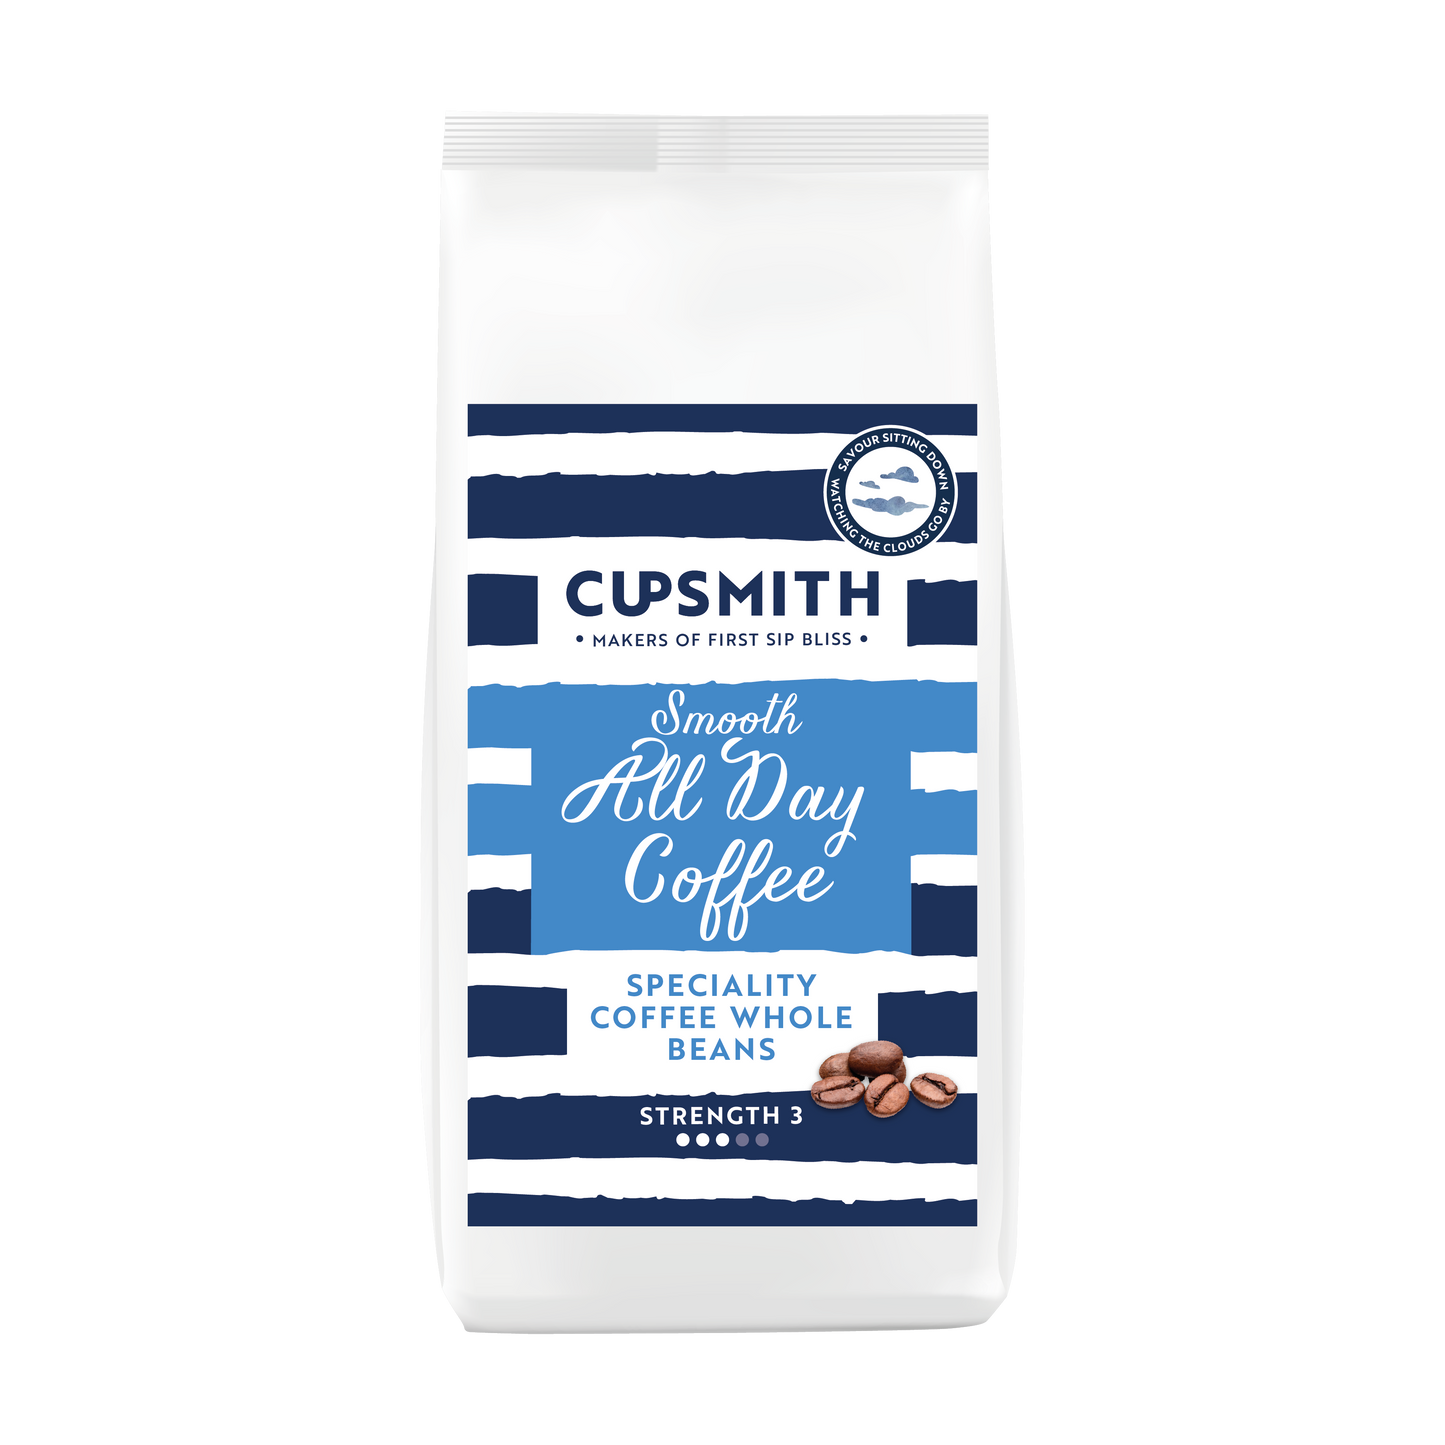 Cupsmith Speciality All Day Coffee - beans & ground